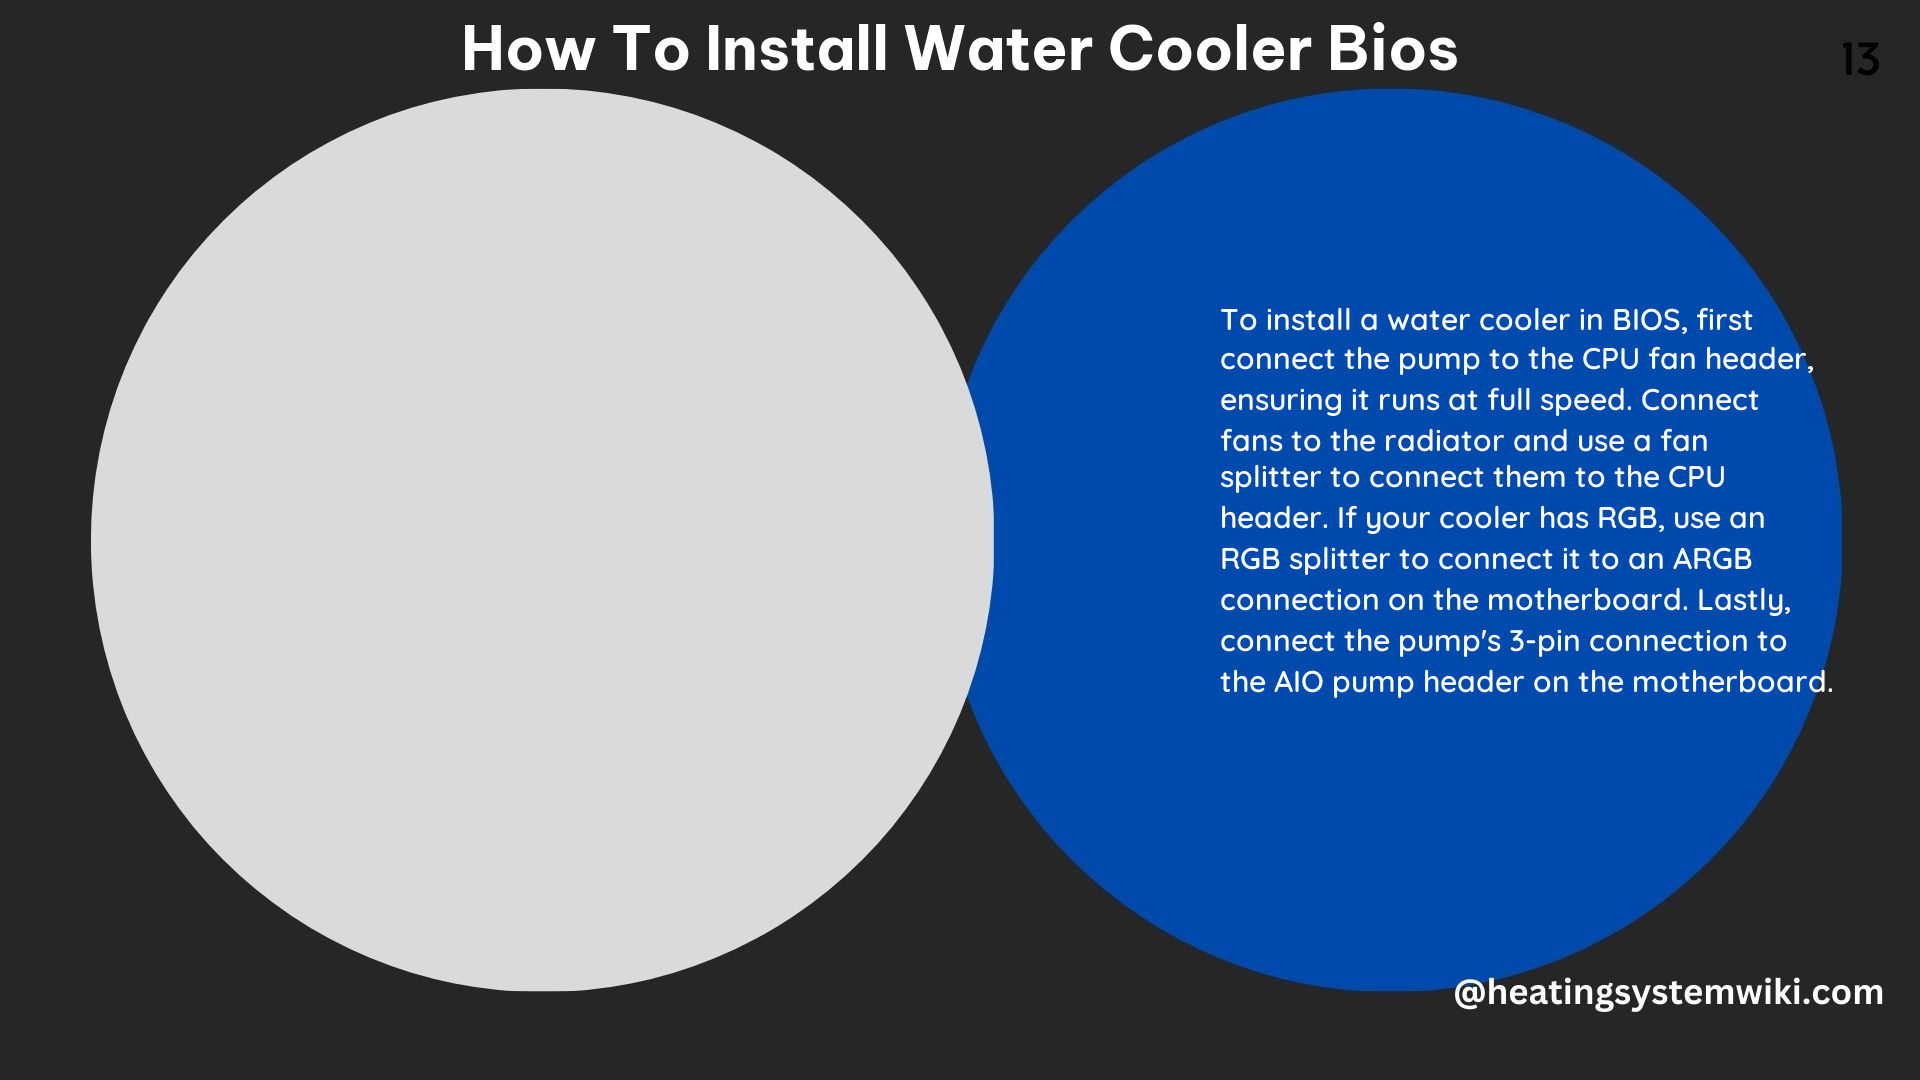 How to Install Water Cooler Bios